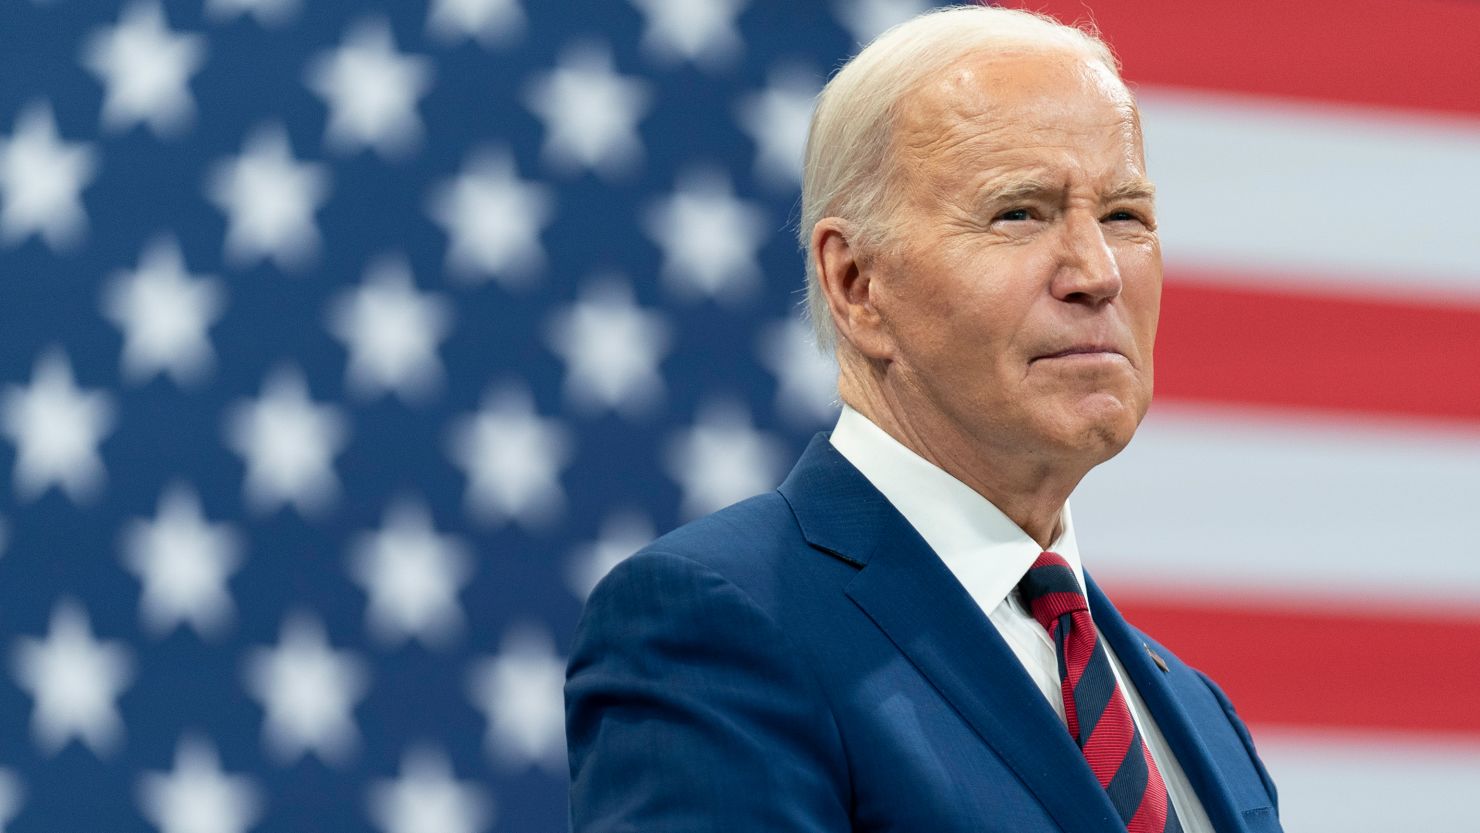 President Joe Biden delivers remarks during a campaign event with Vice President Kamala Harris in Raleigh, North Carolina, on March 26, 2024.